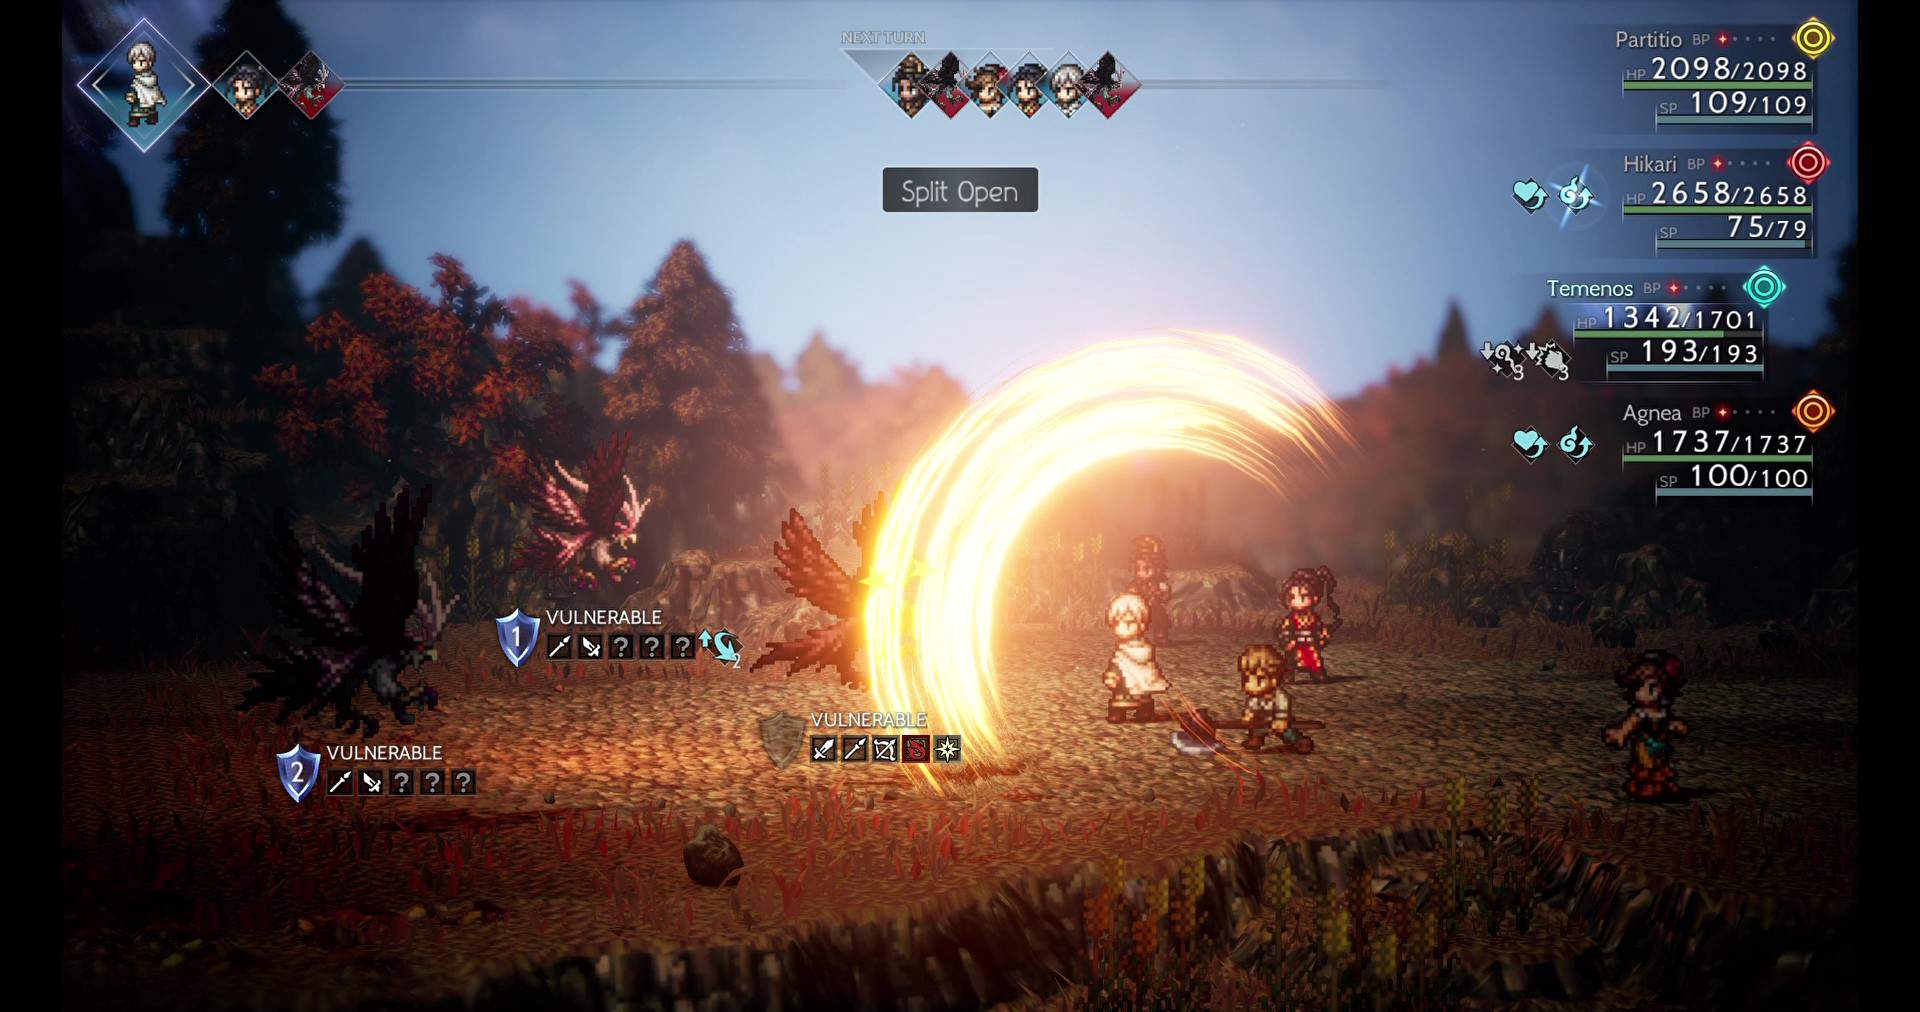 Octopath Traveler 2 review: A new age of RPG